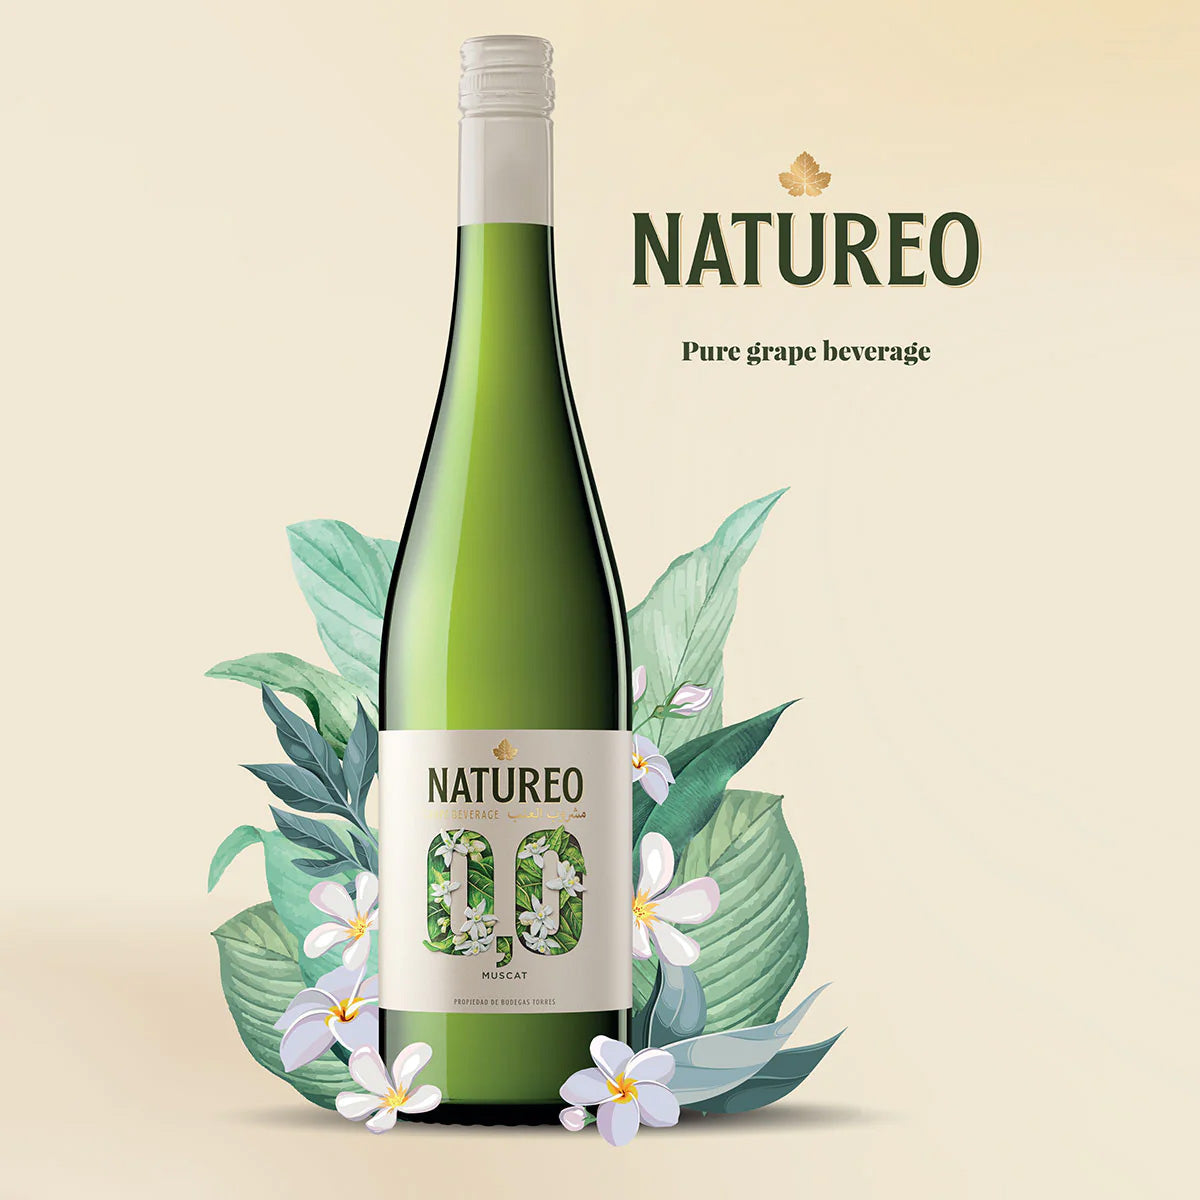 A Promotional image for Natureo